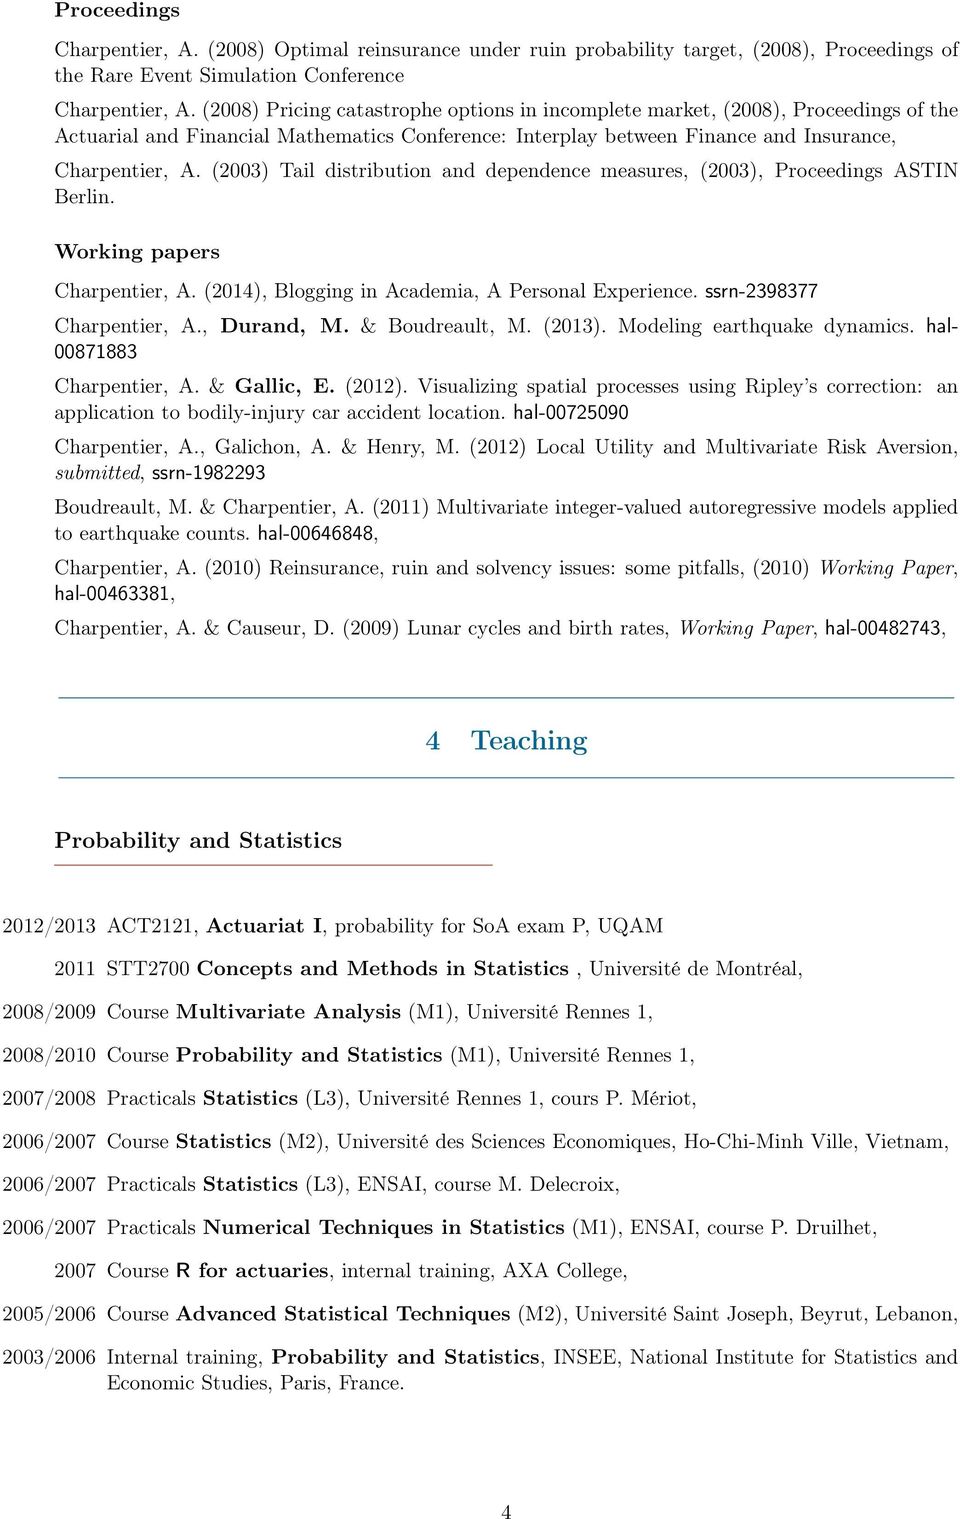 (2003) Tail distribution and dependence measures, (2003), Proceedings ASTIN Berlin. Working papers Charpentier, A. (2014), Blogging in Academia, A Personal Experience. ssrn-2398377 Charpentier, A.